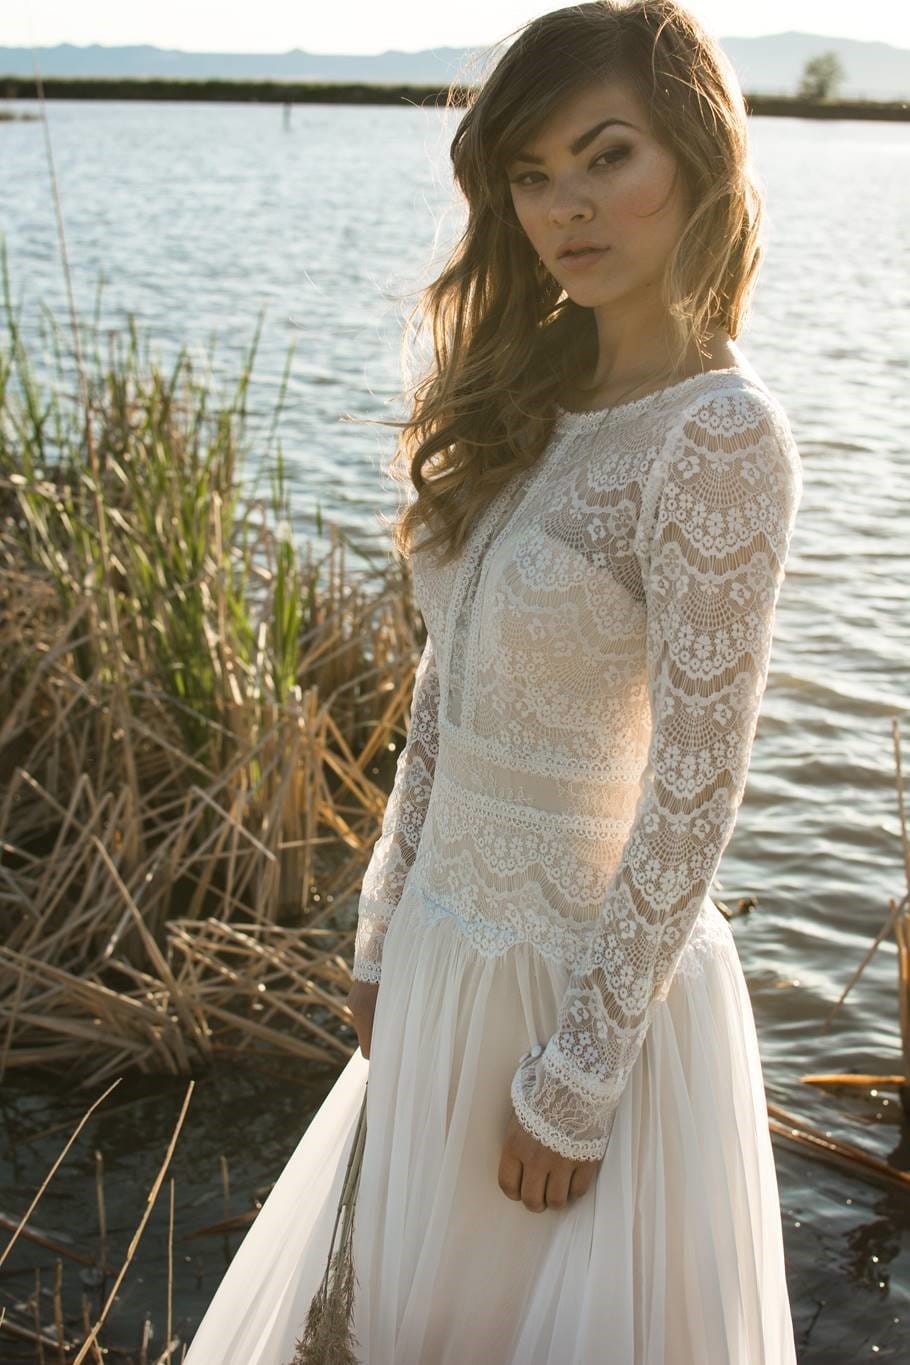 Golden Sunlight and Boho Brides - Styled Shoot Boho Wedding Dresses by Sottero and Midgley and Maggie Sottero